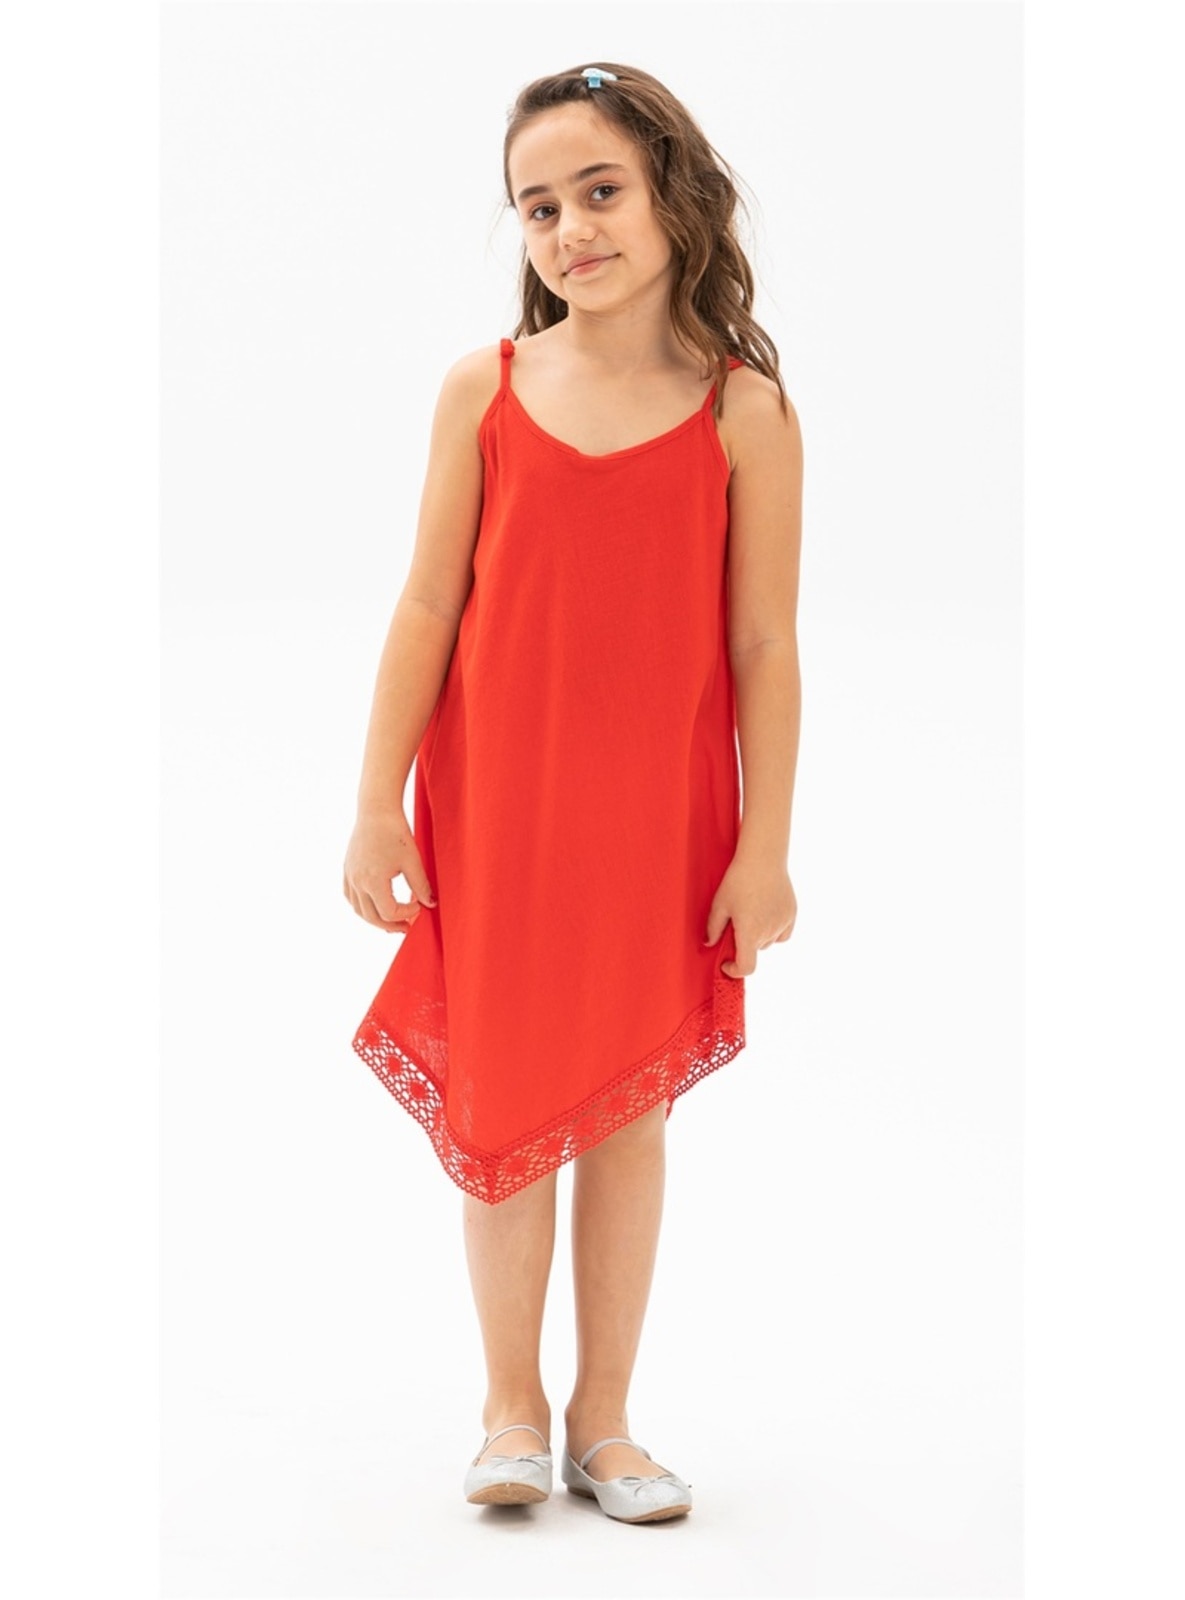 Red - Unlined - Cotton - Girls` Dress